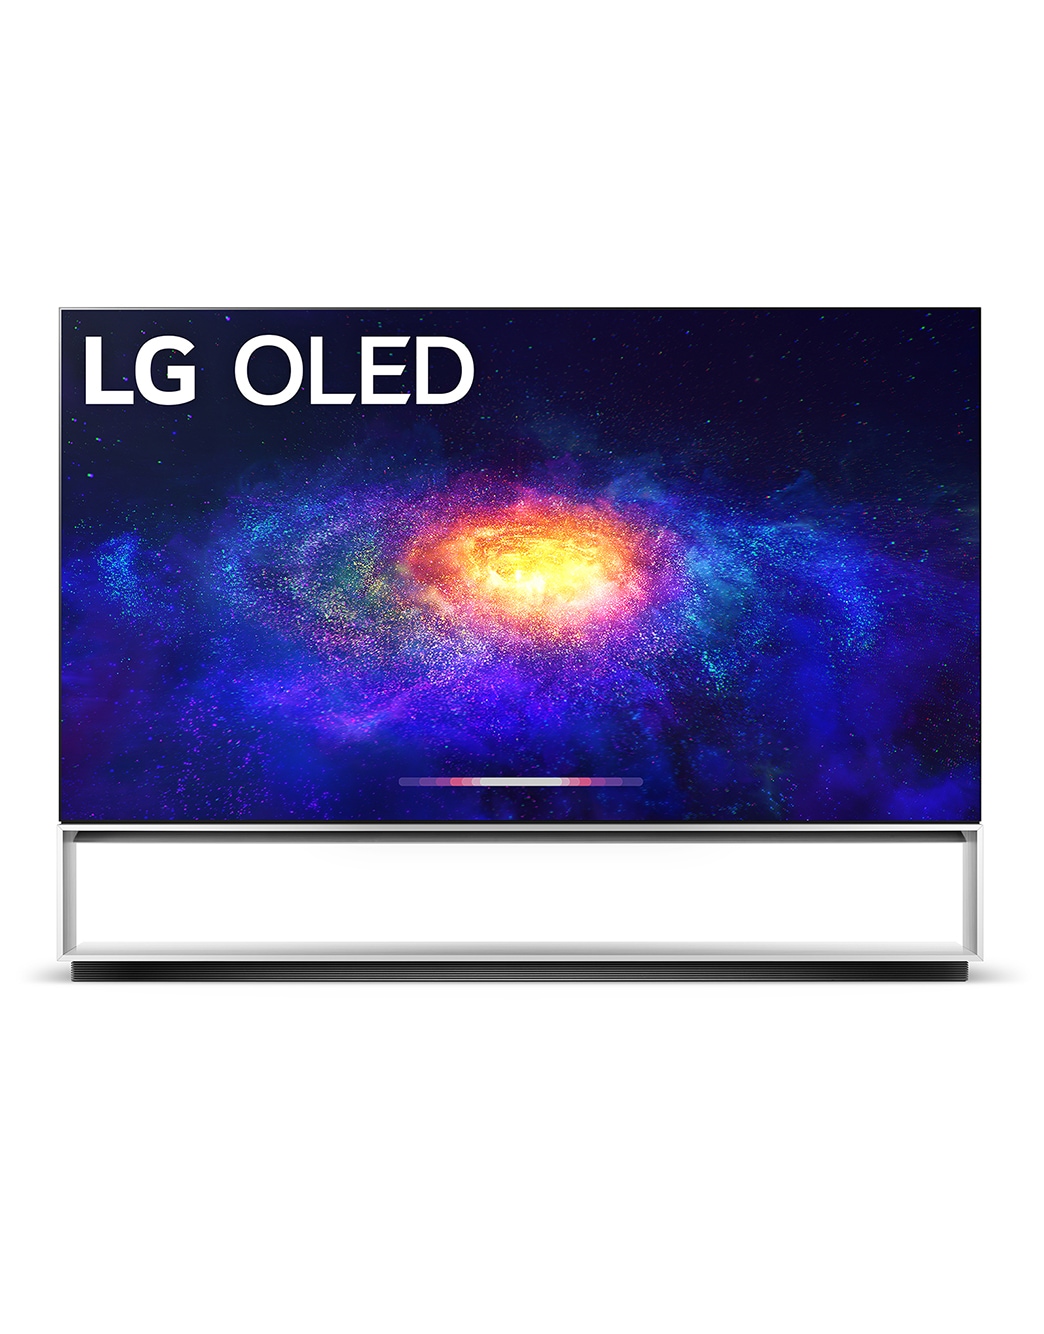 LG's new 8K OLED TVs raises the bar for PC gaming with latest NVIDIA support